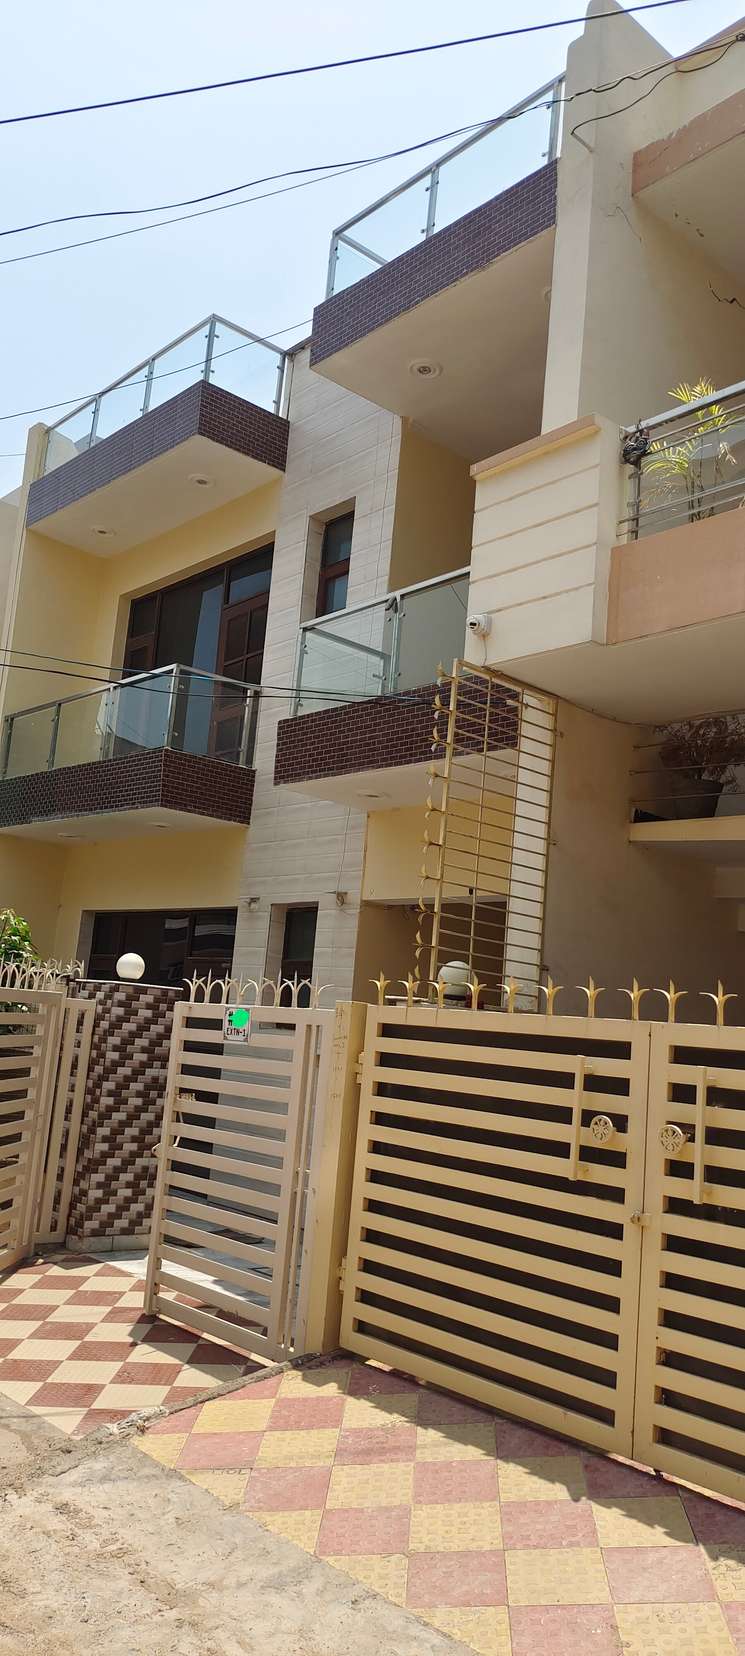 4 Bedroom 135 Sq.Yd. Independent House in Kharar Mohali